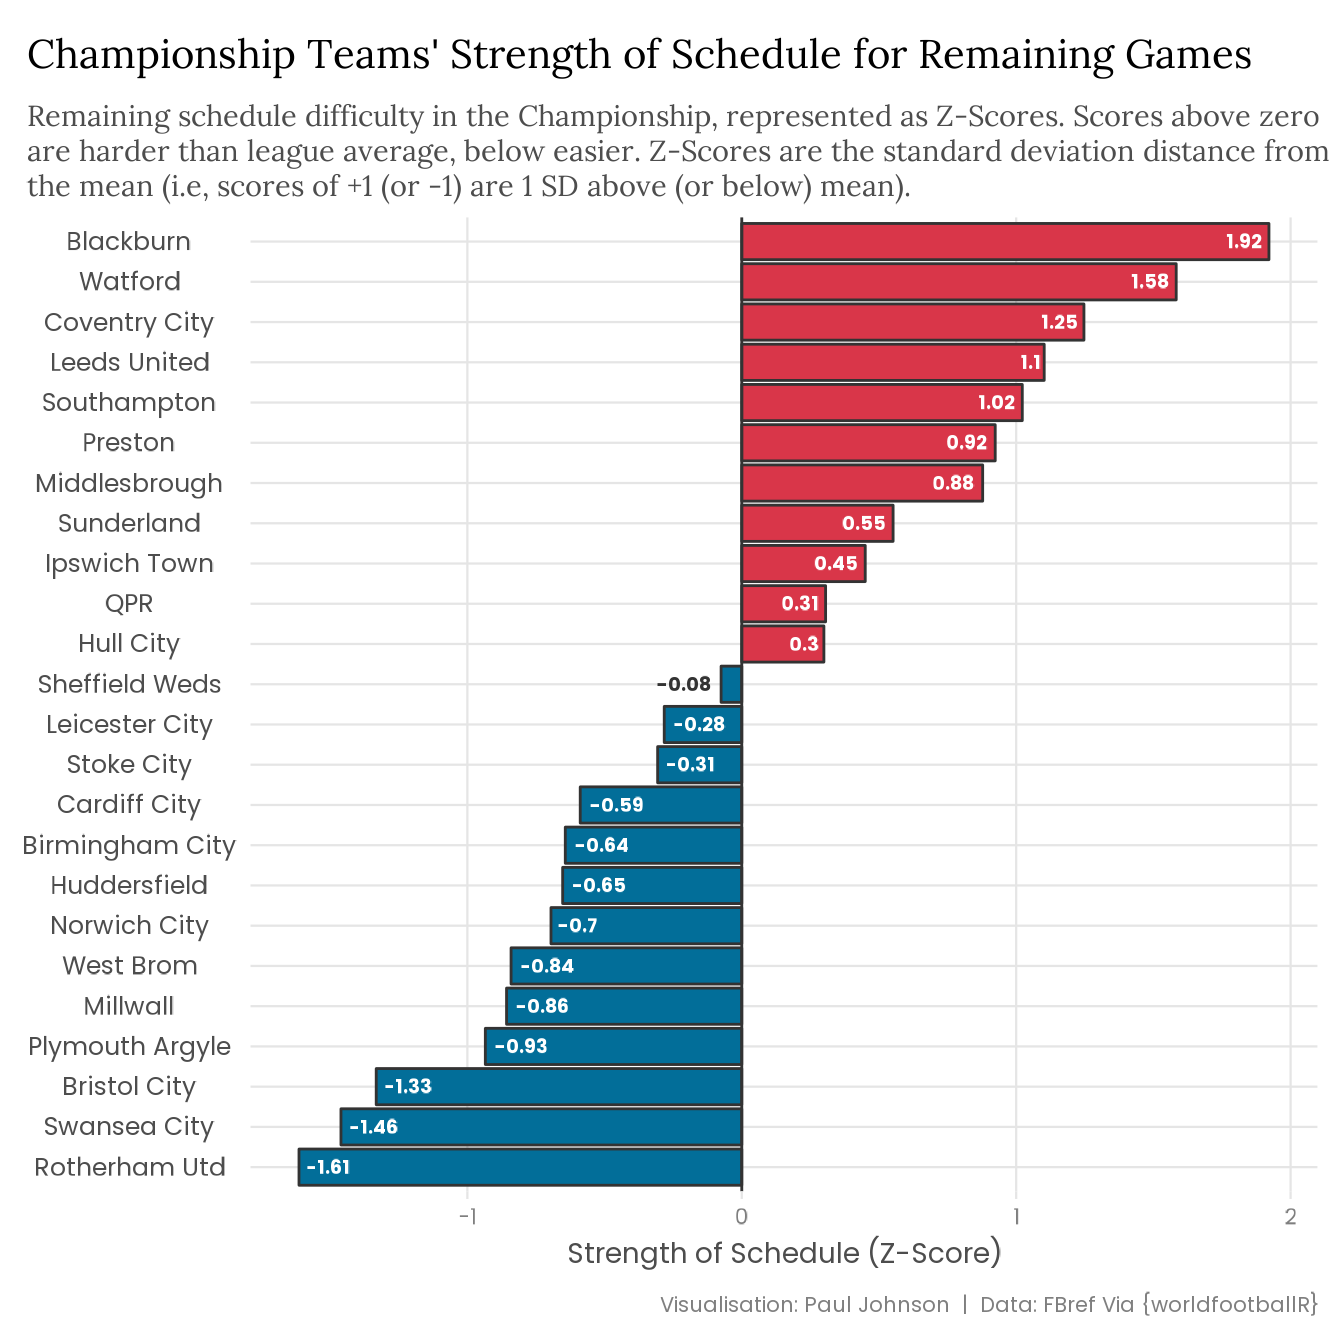 A barplot visualising the strength of remaining schedules for every team in the Championship. Positive scores indicate harder than league average schedules, and negative scores indicate easier than league average scores. The hardest remaining schedules are Blackburn (1.92), Watford (1.58), and Coventry (1.25), while the easiest schedules are Rotherham (-1.61), Swansea (-1.46), and Bristol City (-1.33). 